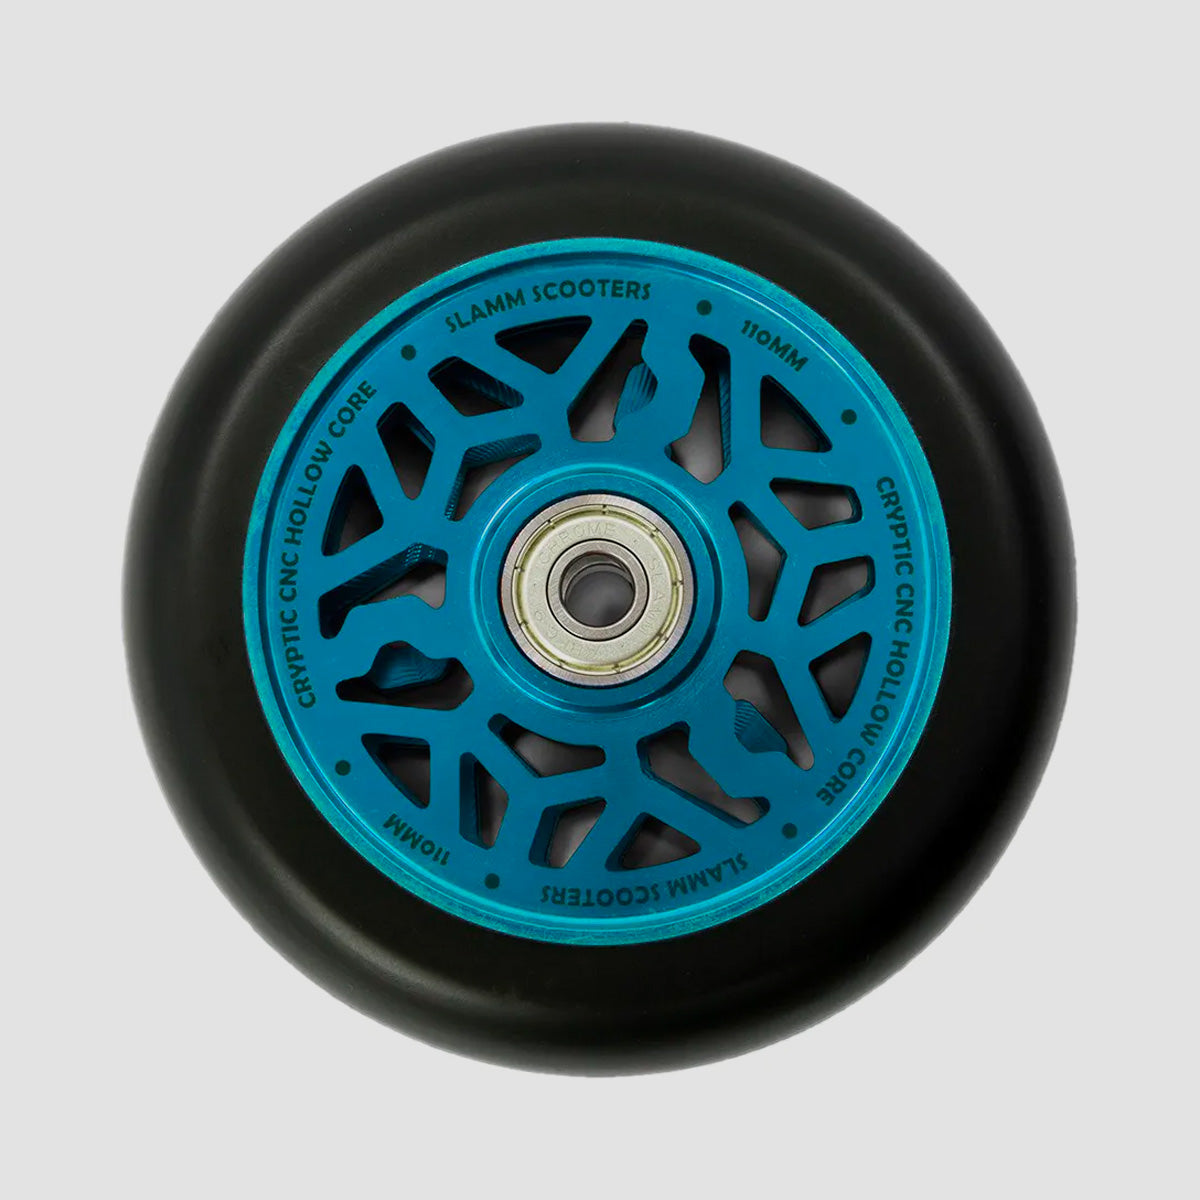 Slamm Cryptic Hollow Core Scooter Wheels Blue 110mm